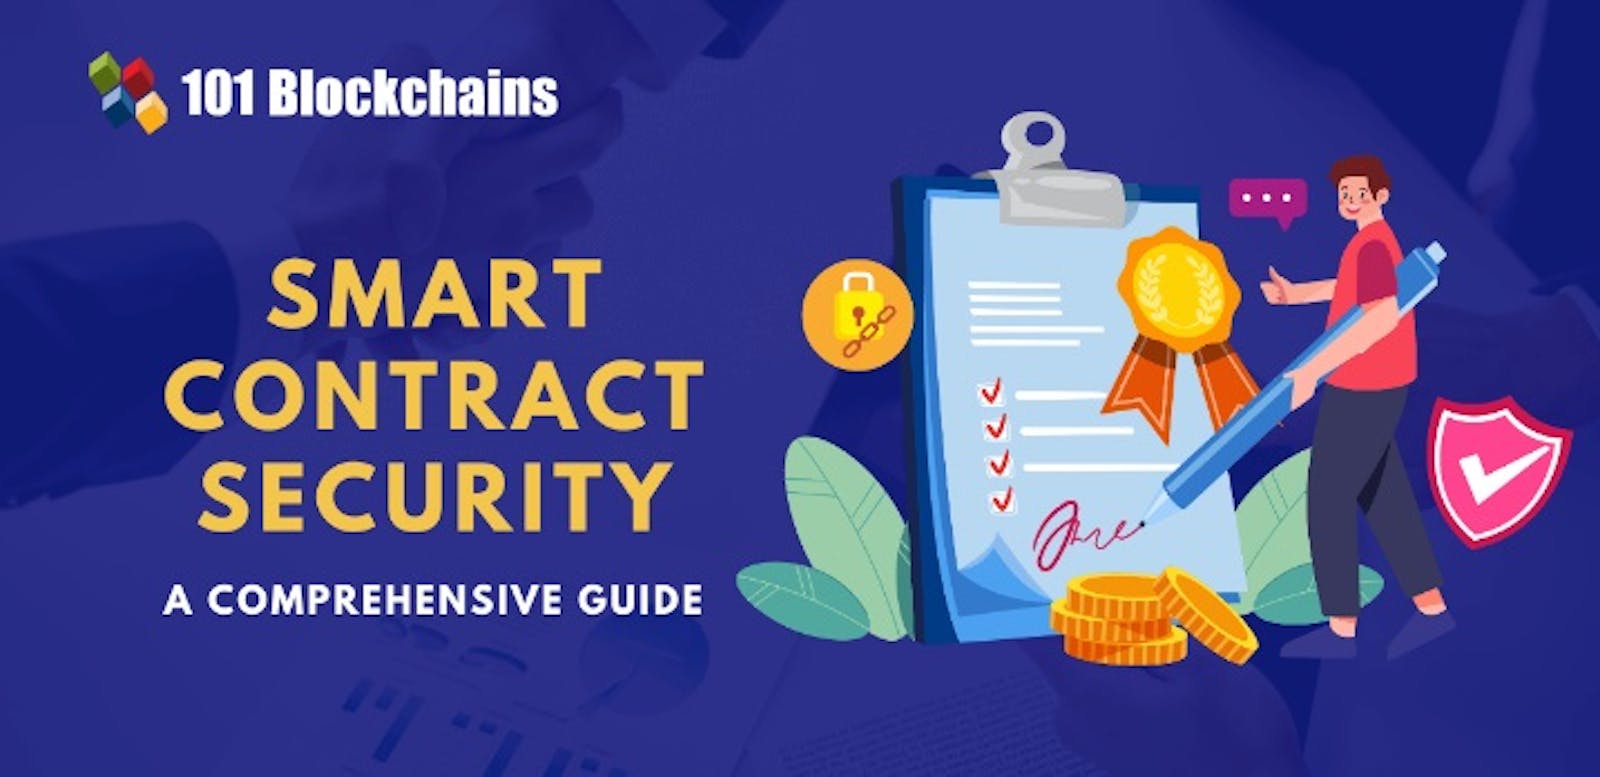 Learn About Smart Contracts Security by 101 Blockchains